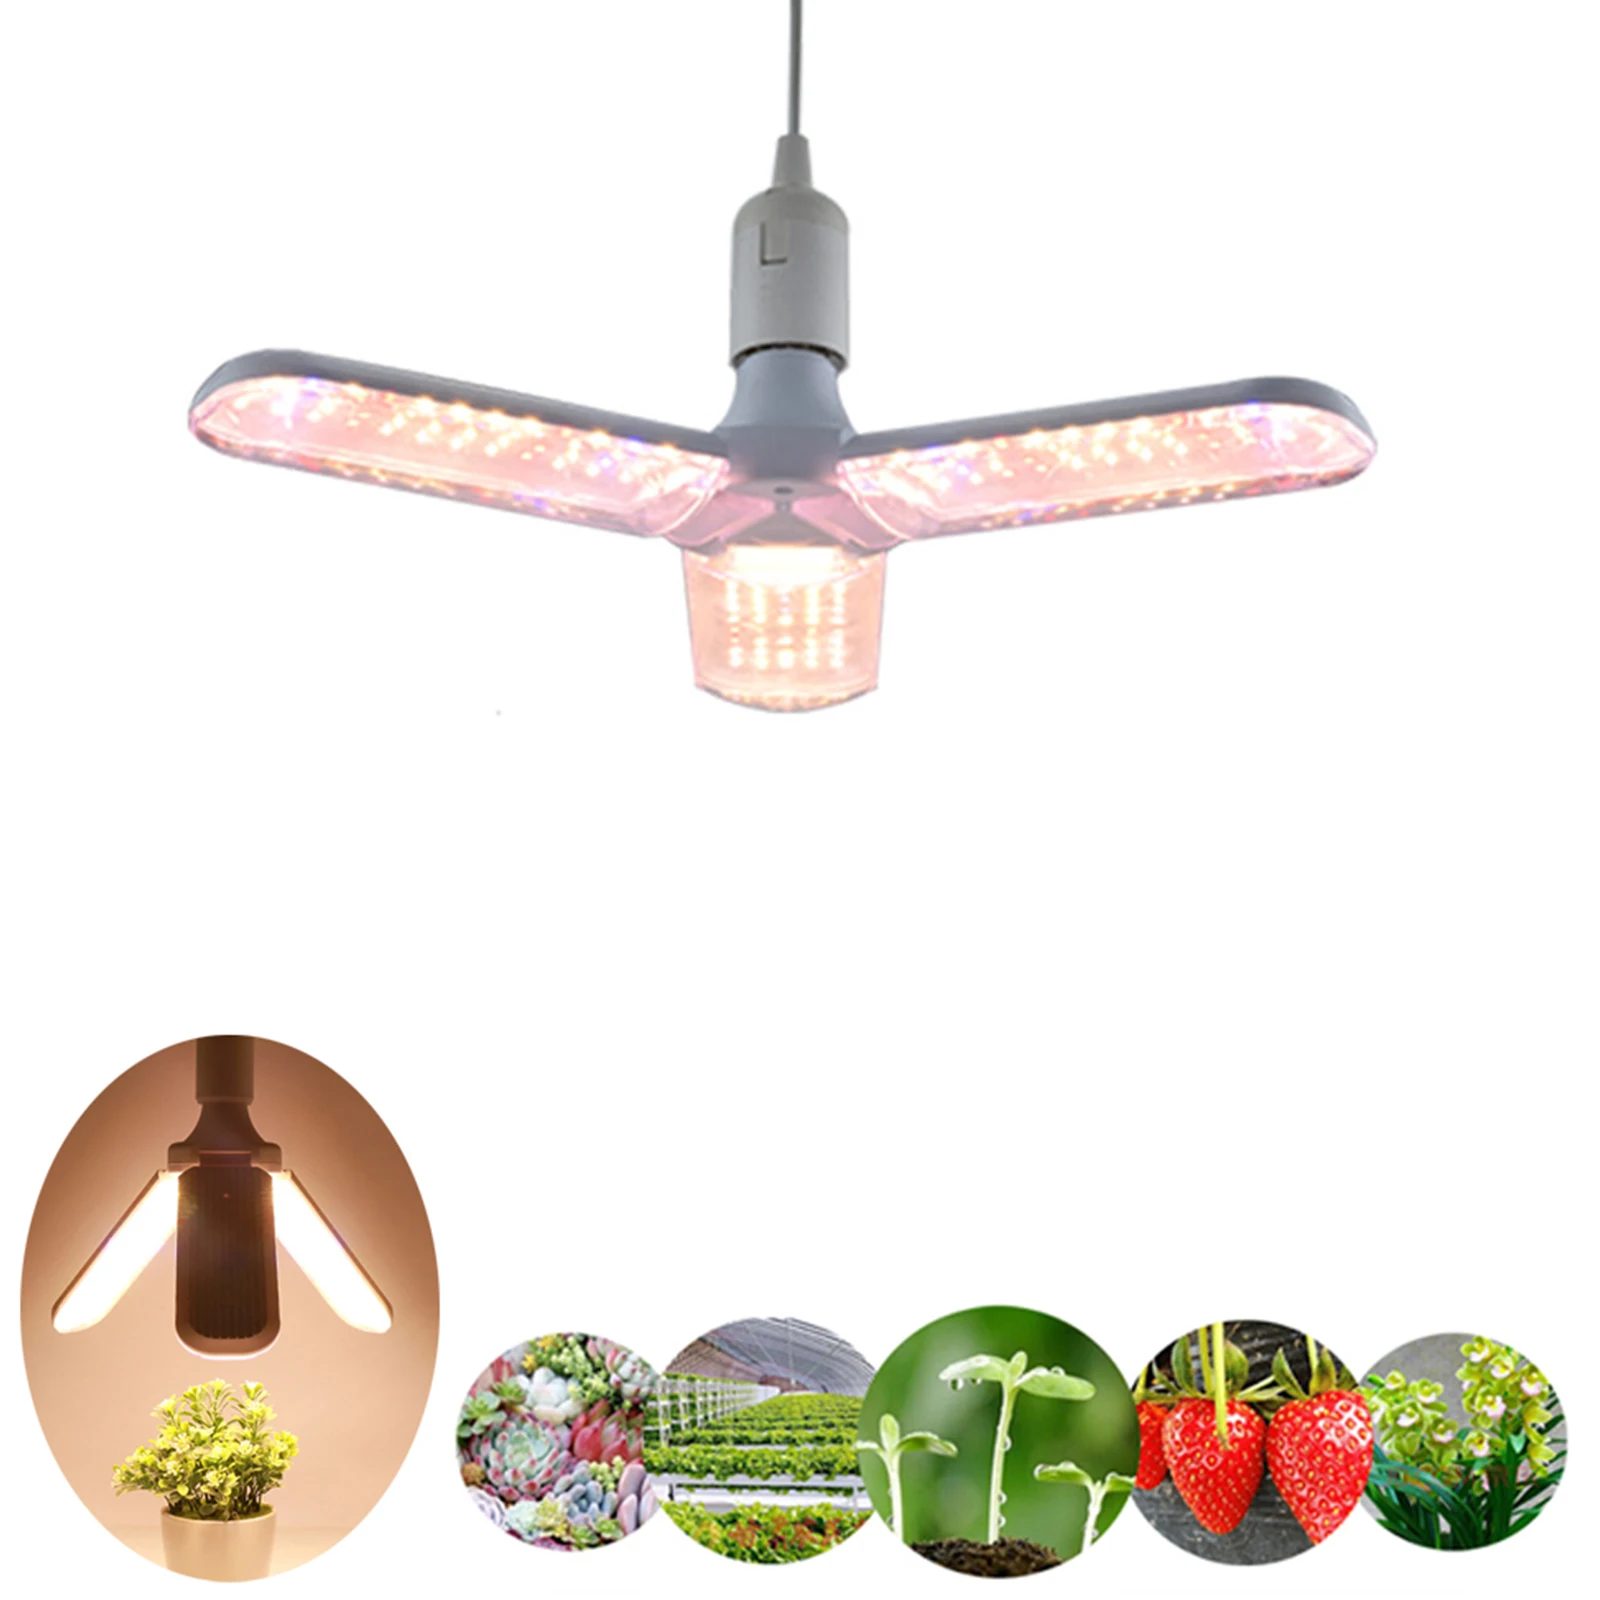 Newest LED Grow Light Full Spectrum Plant Lamp Warm Light Growing Bulb Adjustable for Indoor Plants Seedling Flowers Fitolamp